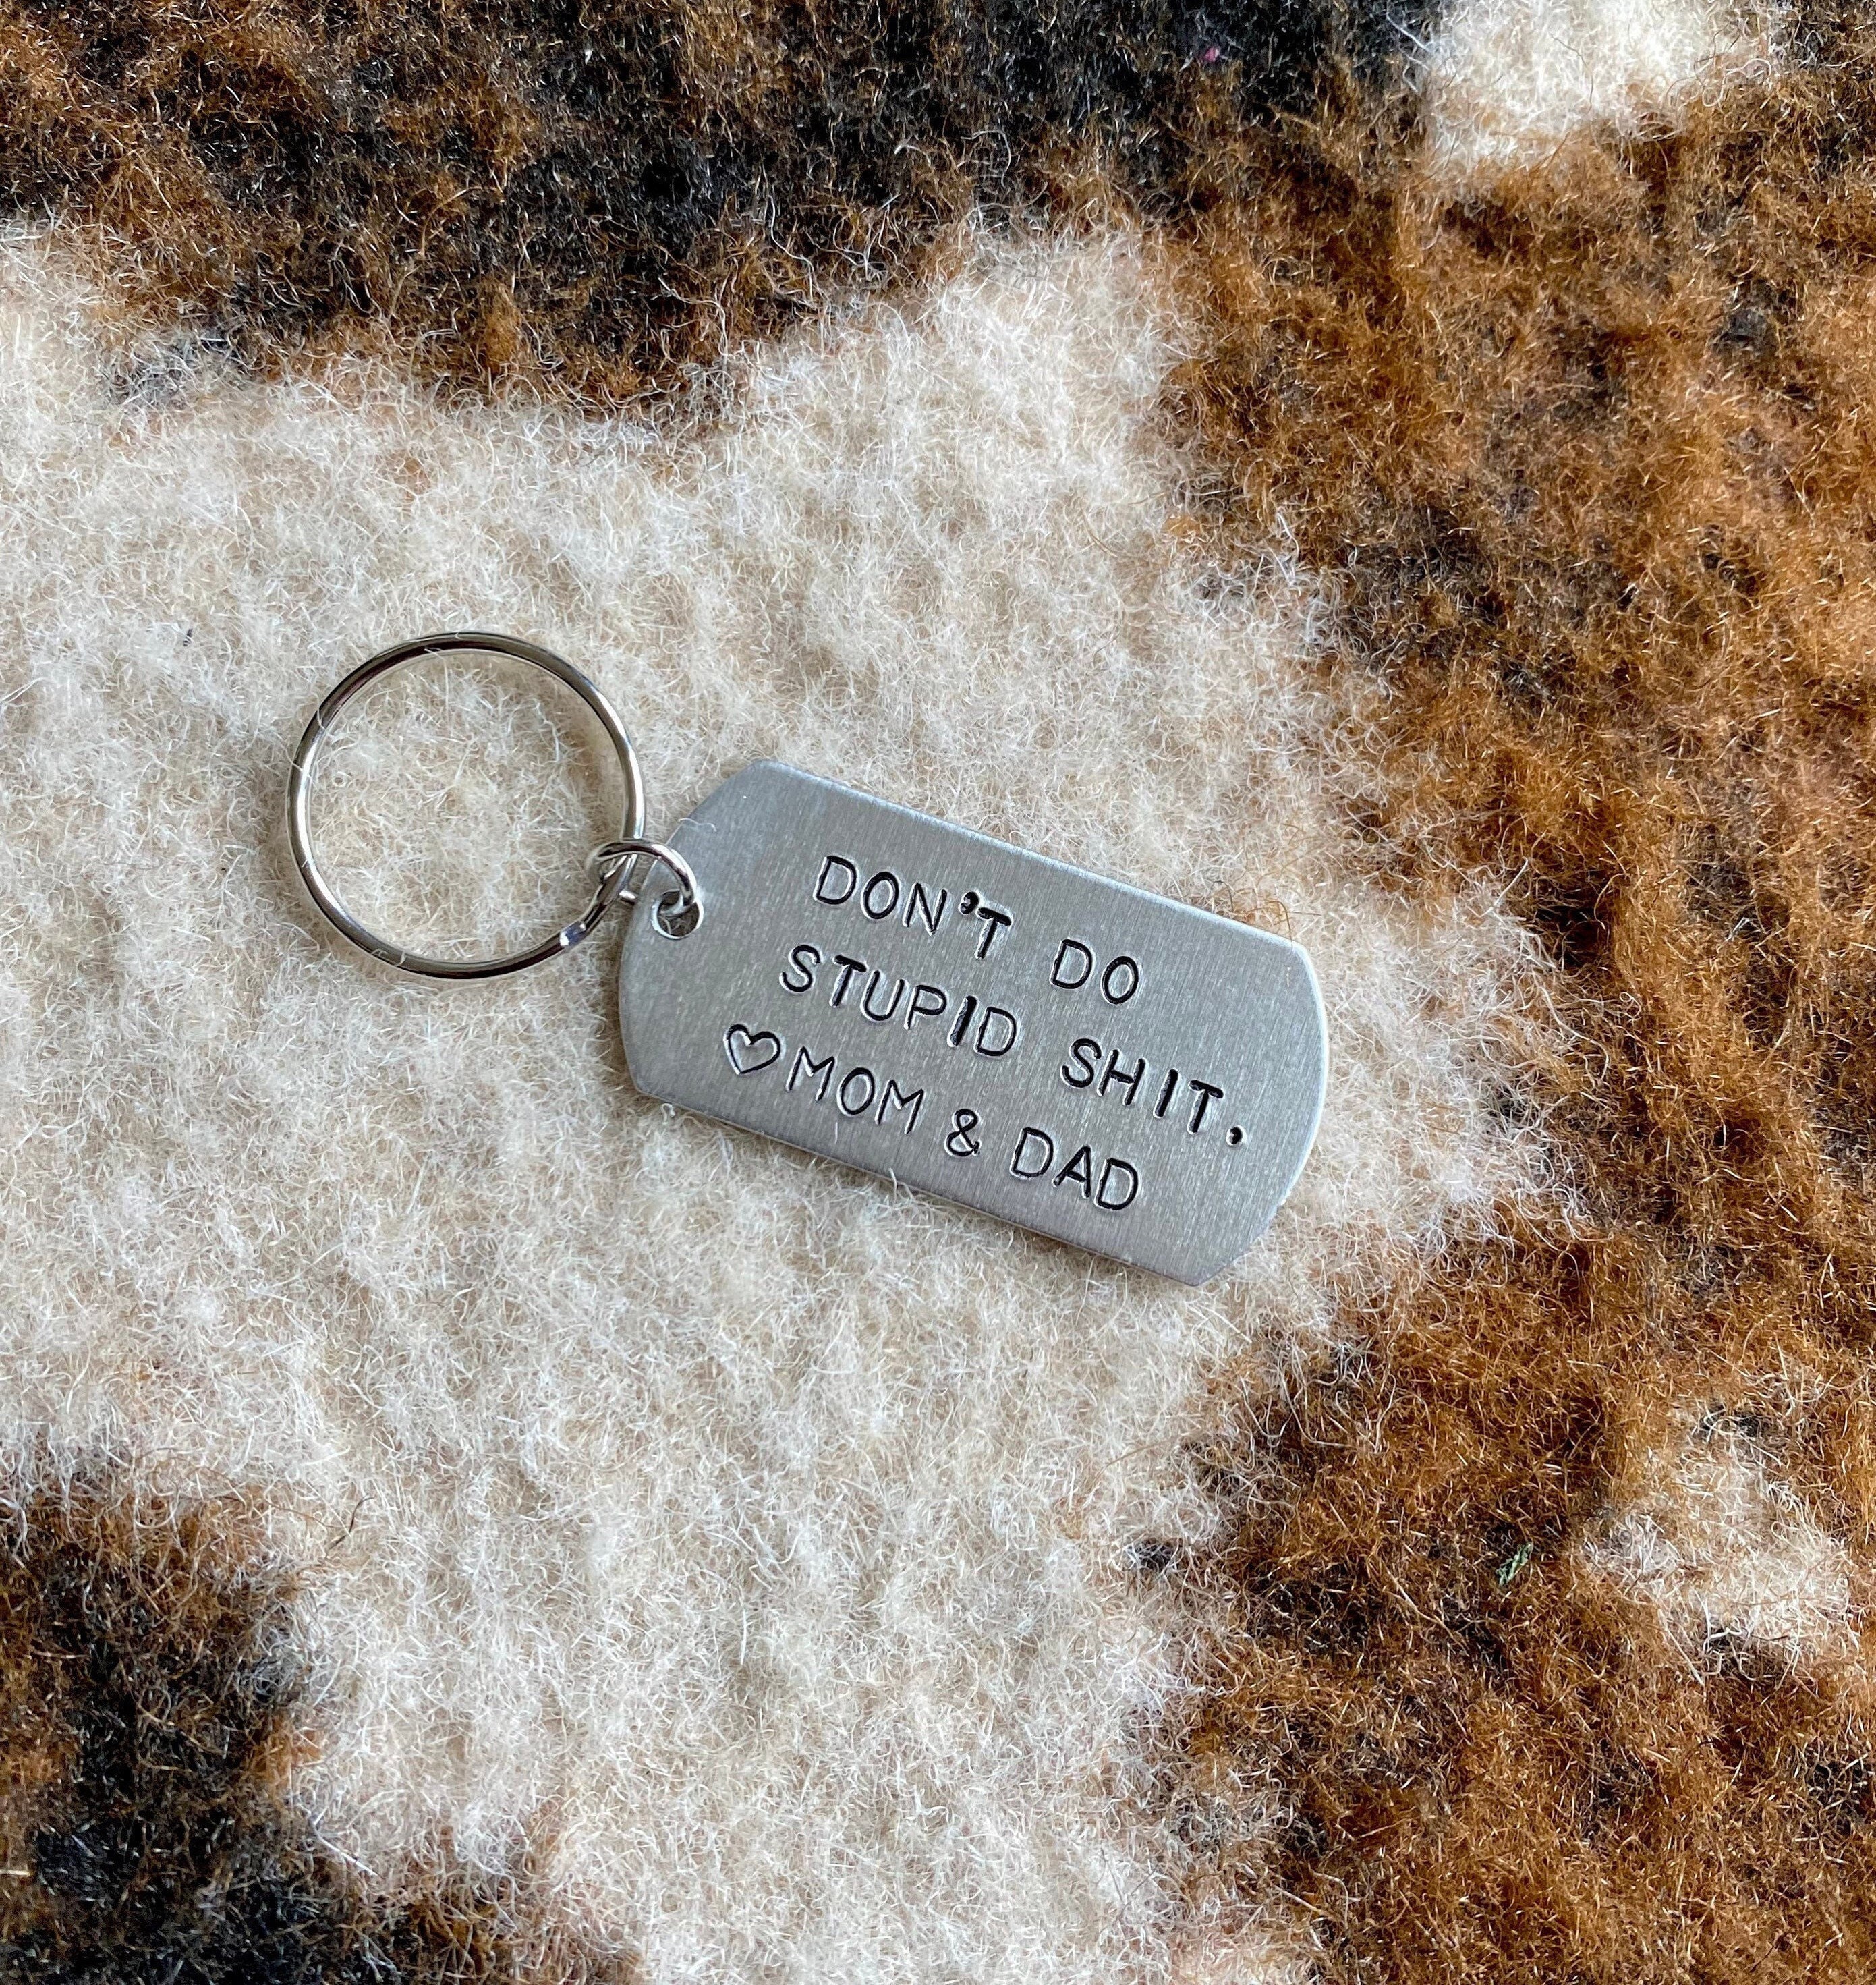 Dont Do Stupid Sht Key Chain - Laser Engraved Keychain for New driver, Son  or Daughter Gift - (Black, Don't Do Stupid - Love Dad)